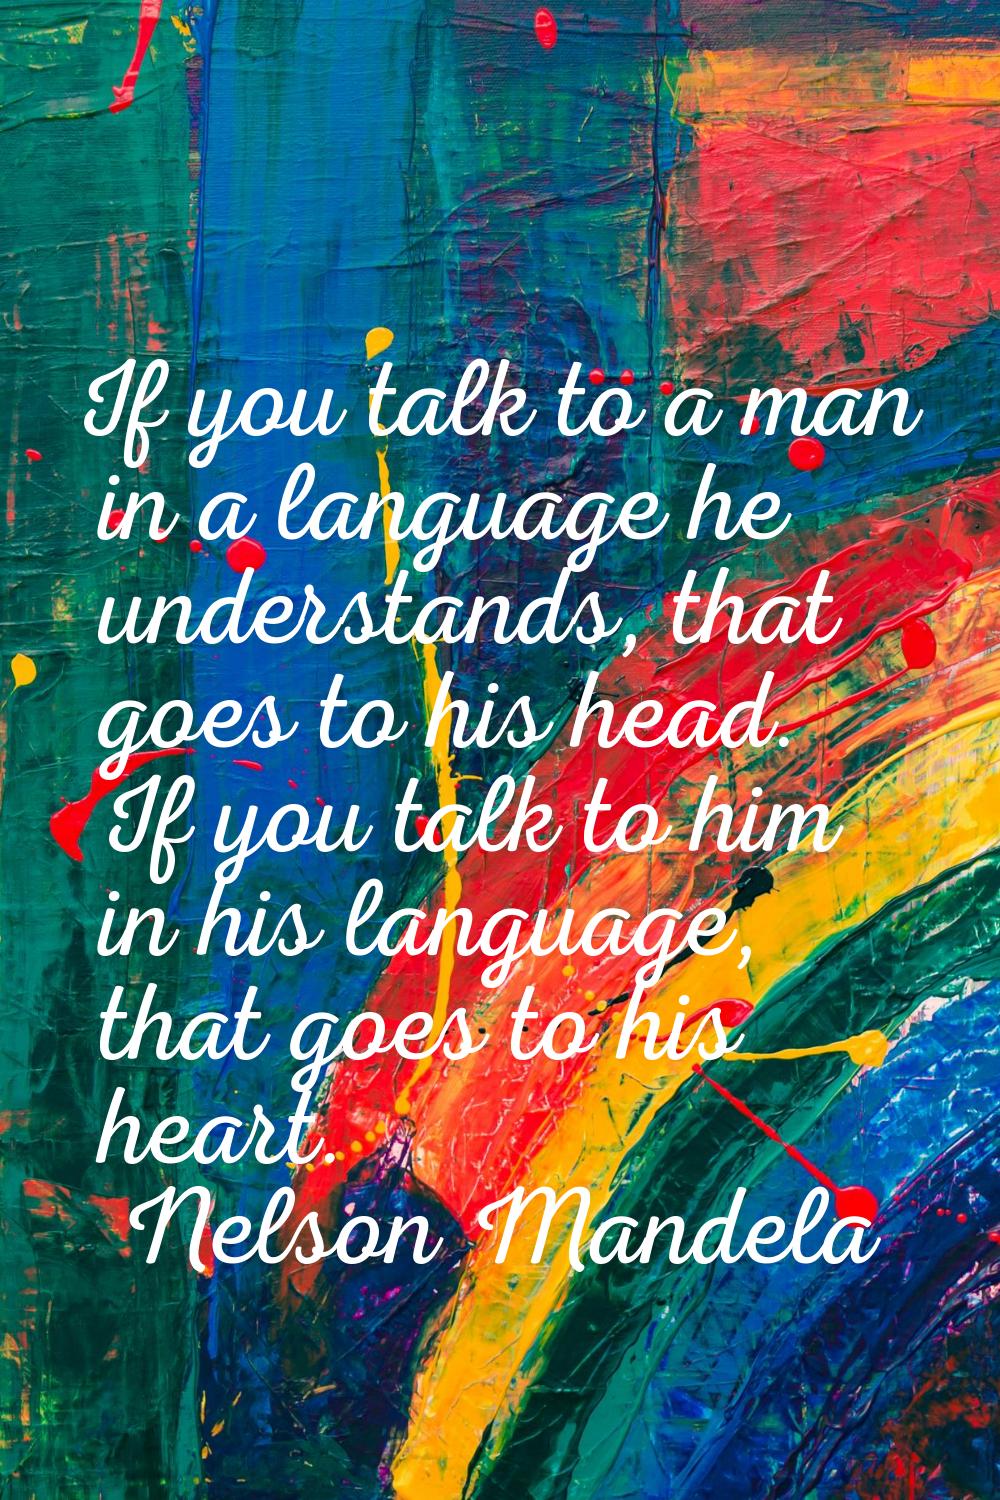 If you talk to a man in a language he understands, that goes to his head. If you talk to him in his